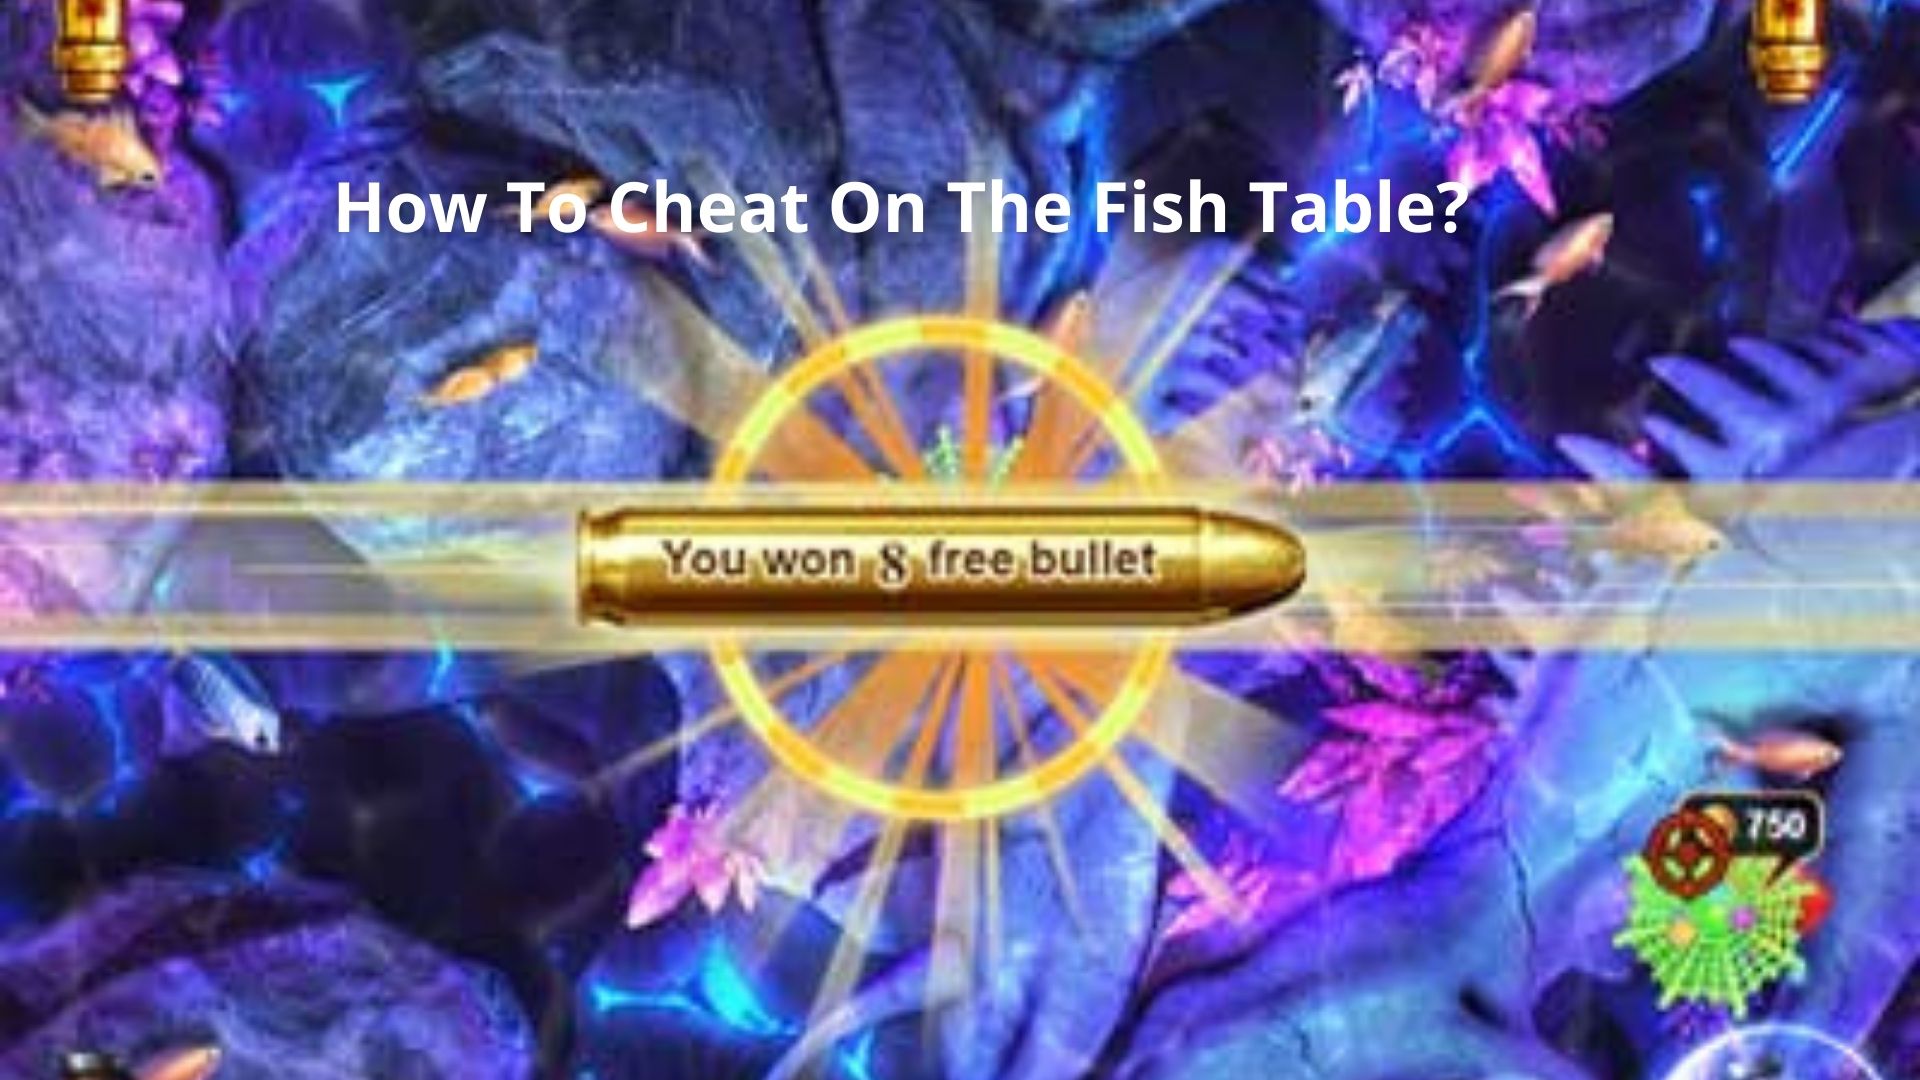 How to Cheat on the Fish Table